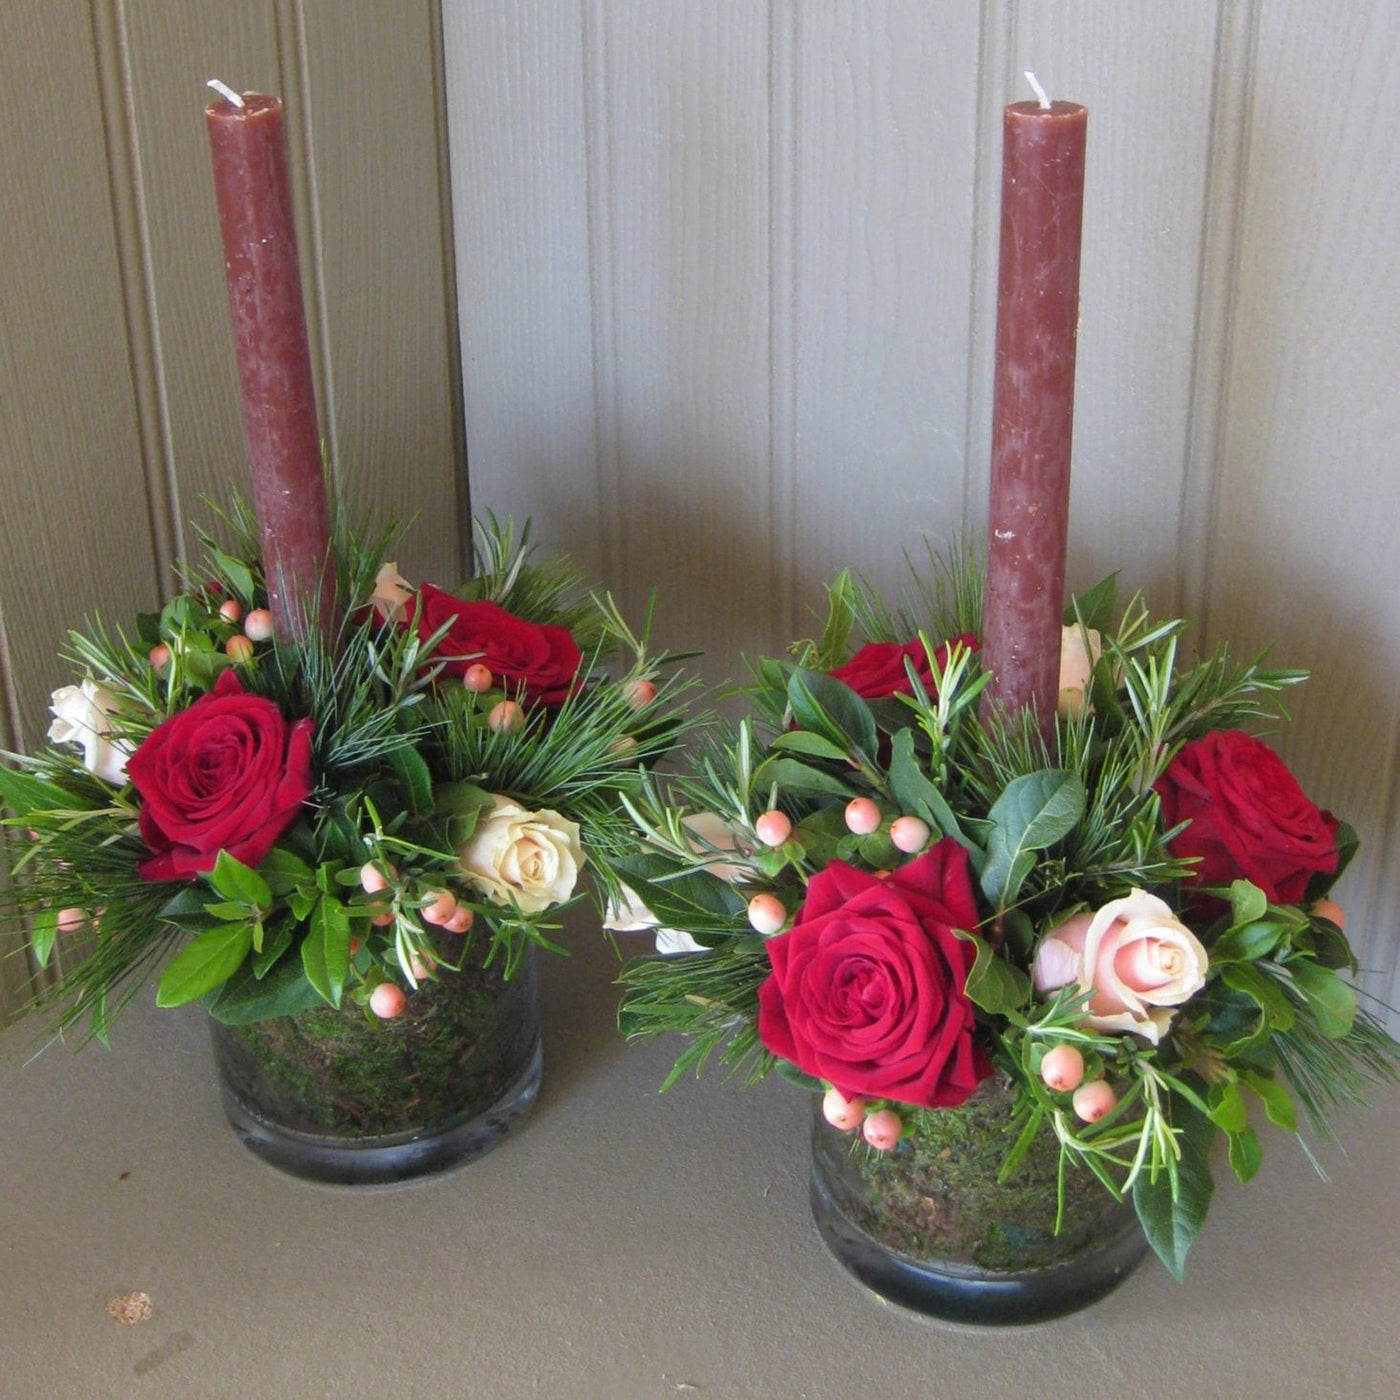 Christmas table centers in glass tank vase.